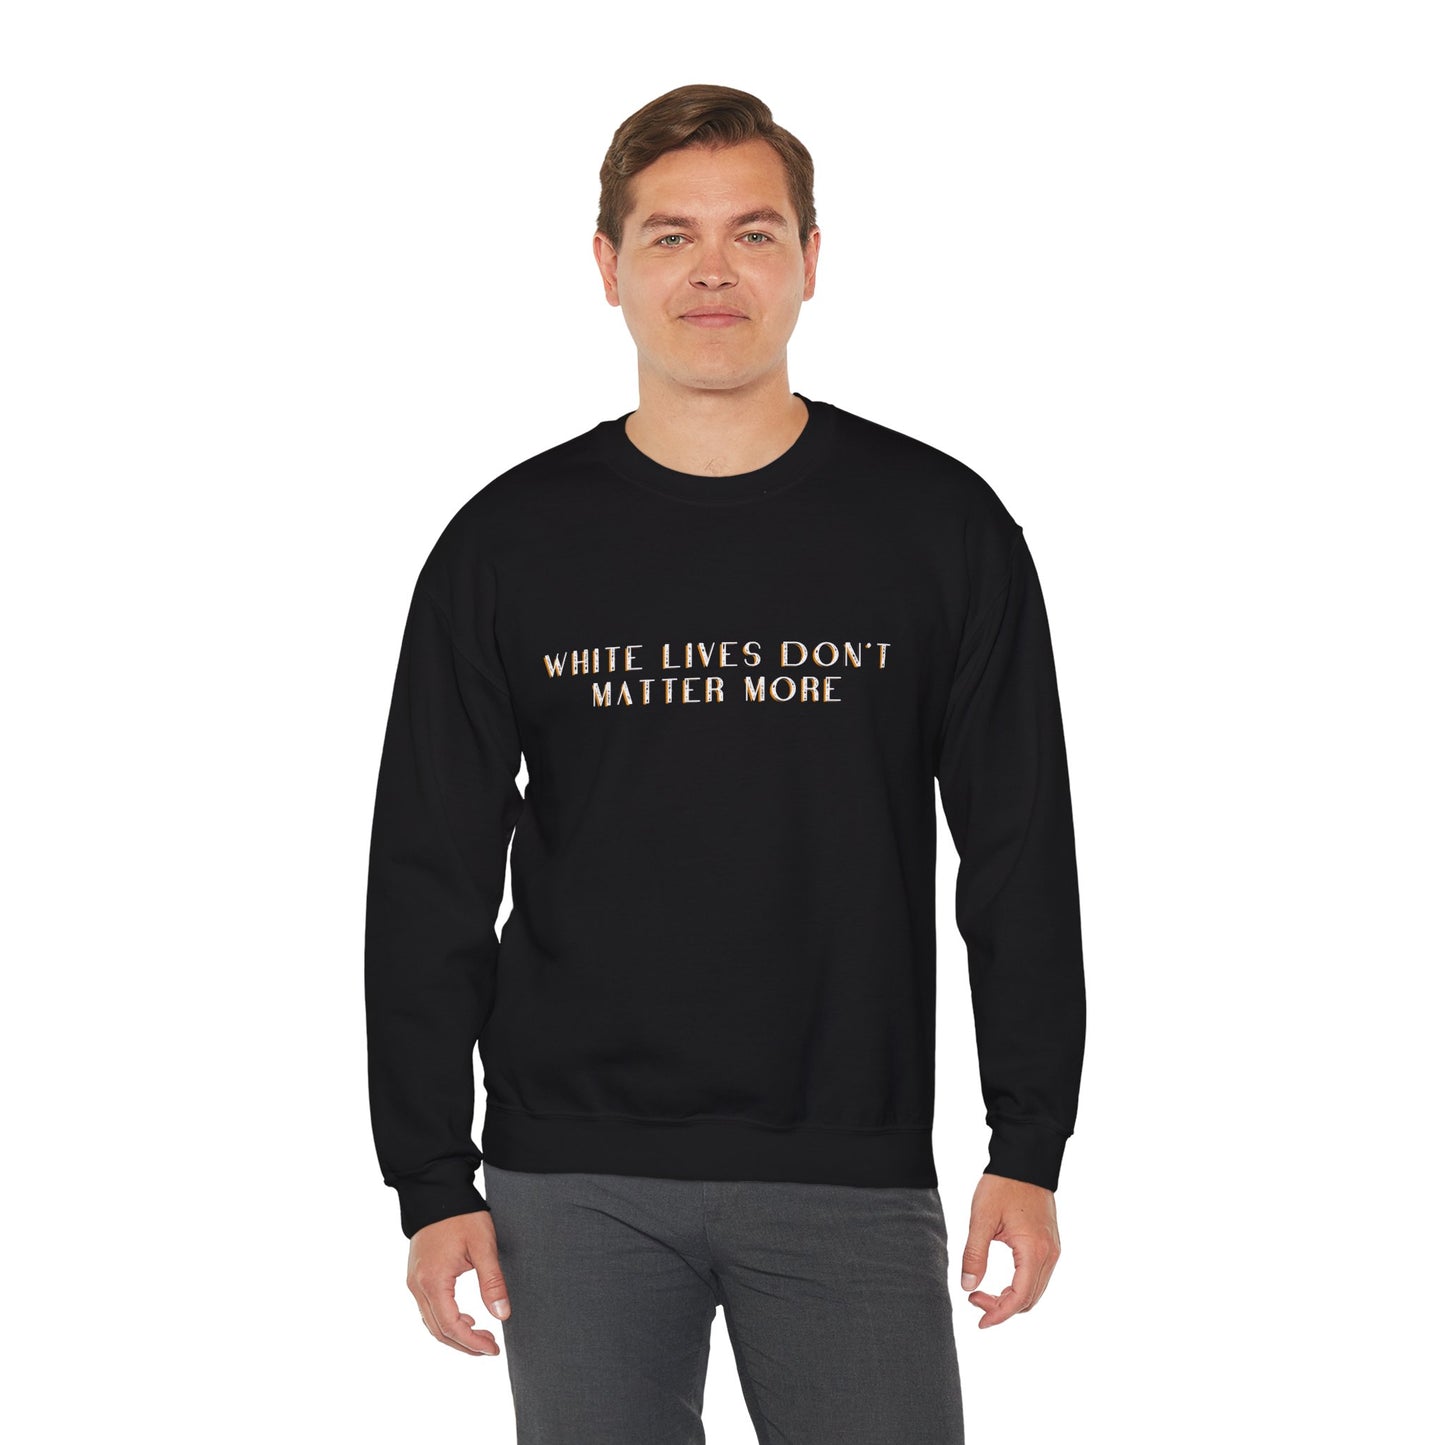 "White Lives Don't Matter More" Crewneck Sweatshirt Black, with Heavy Text Only